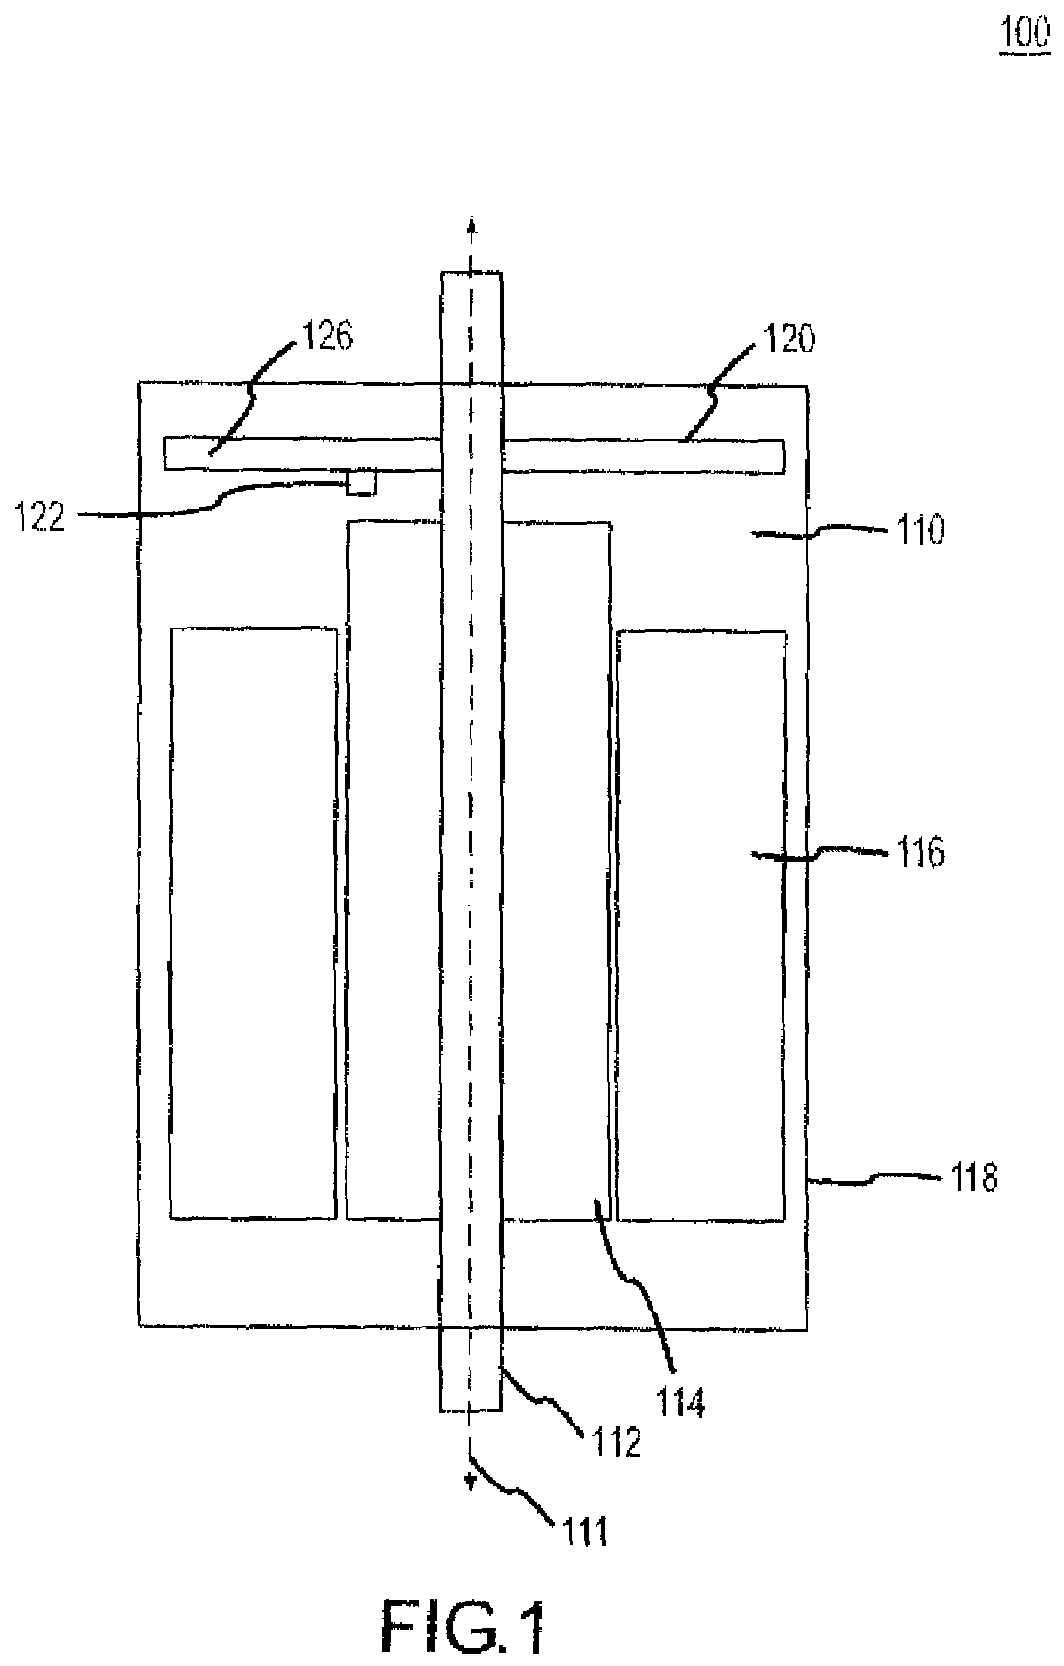 System and method for determining angular position and controlling rotor orientation